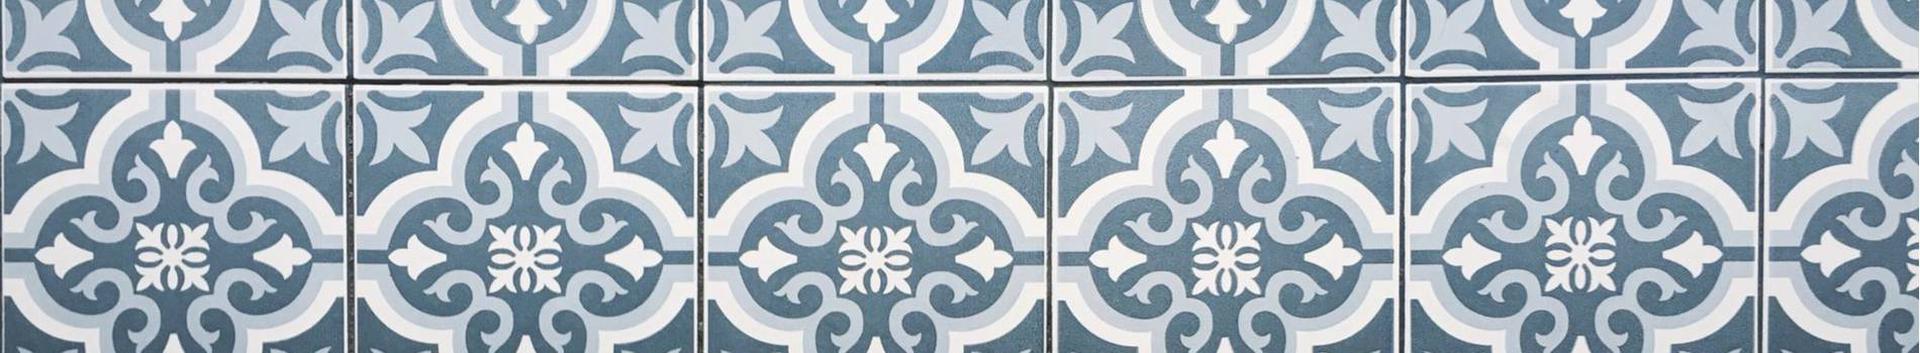 We specialize in high-quality tiling work for bathrooms, swimming pools, and wetrooms.